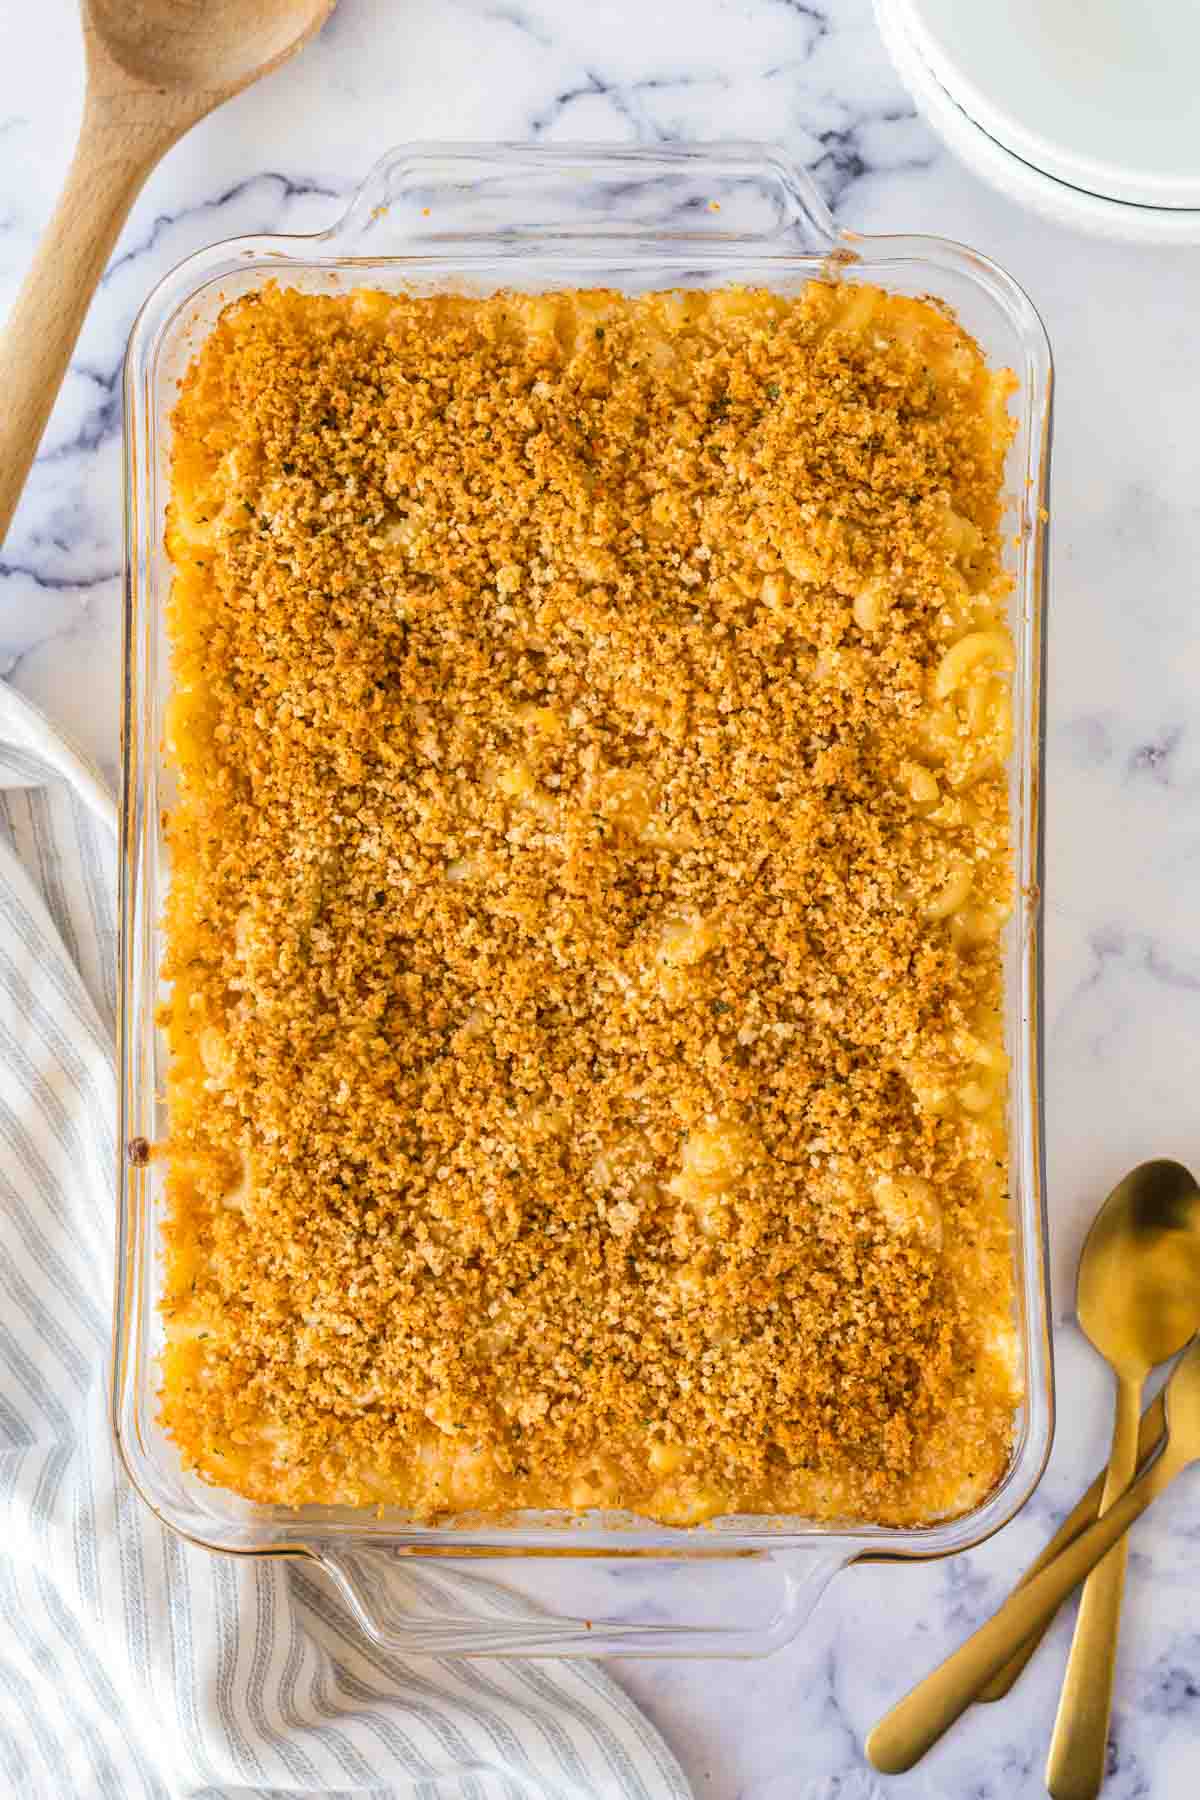 Finished baked mac n cheese in a baking dish.